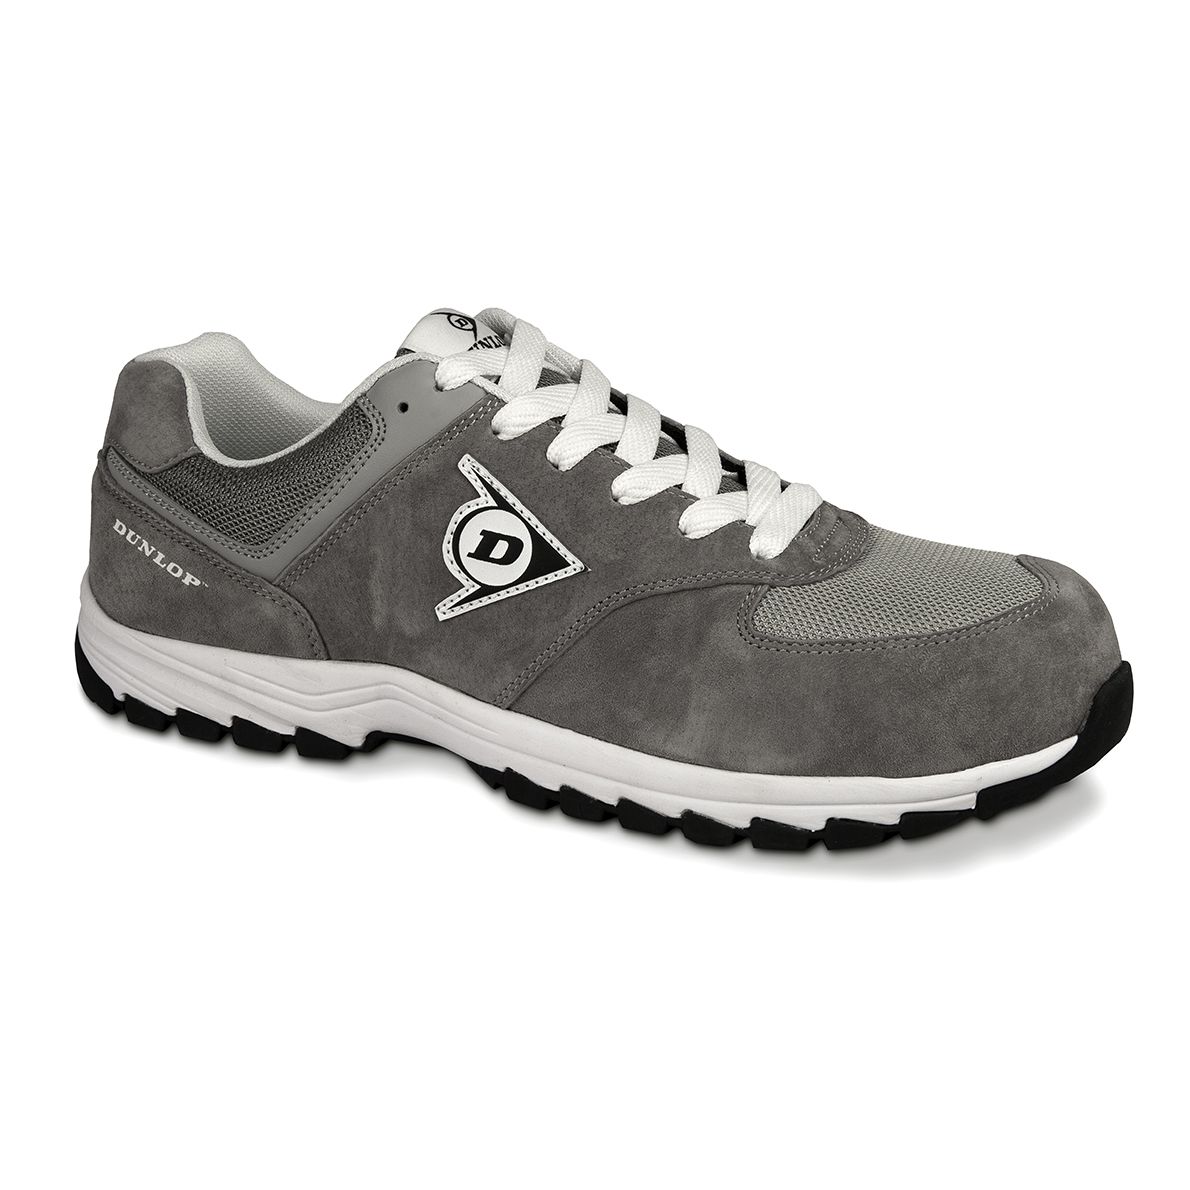 SALE: Dunlop Flying Arrow ED2 S3 safety low shoe, sporty & breathable, grey, size 46